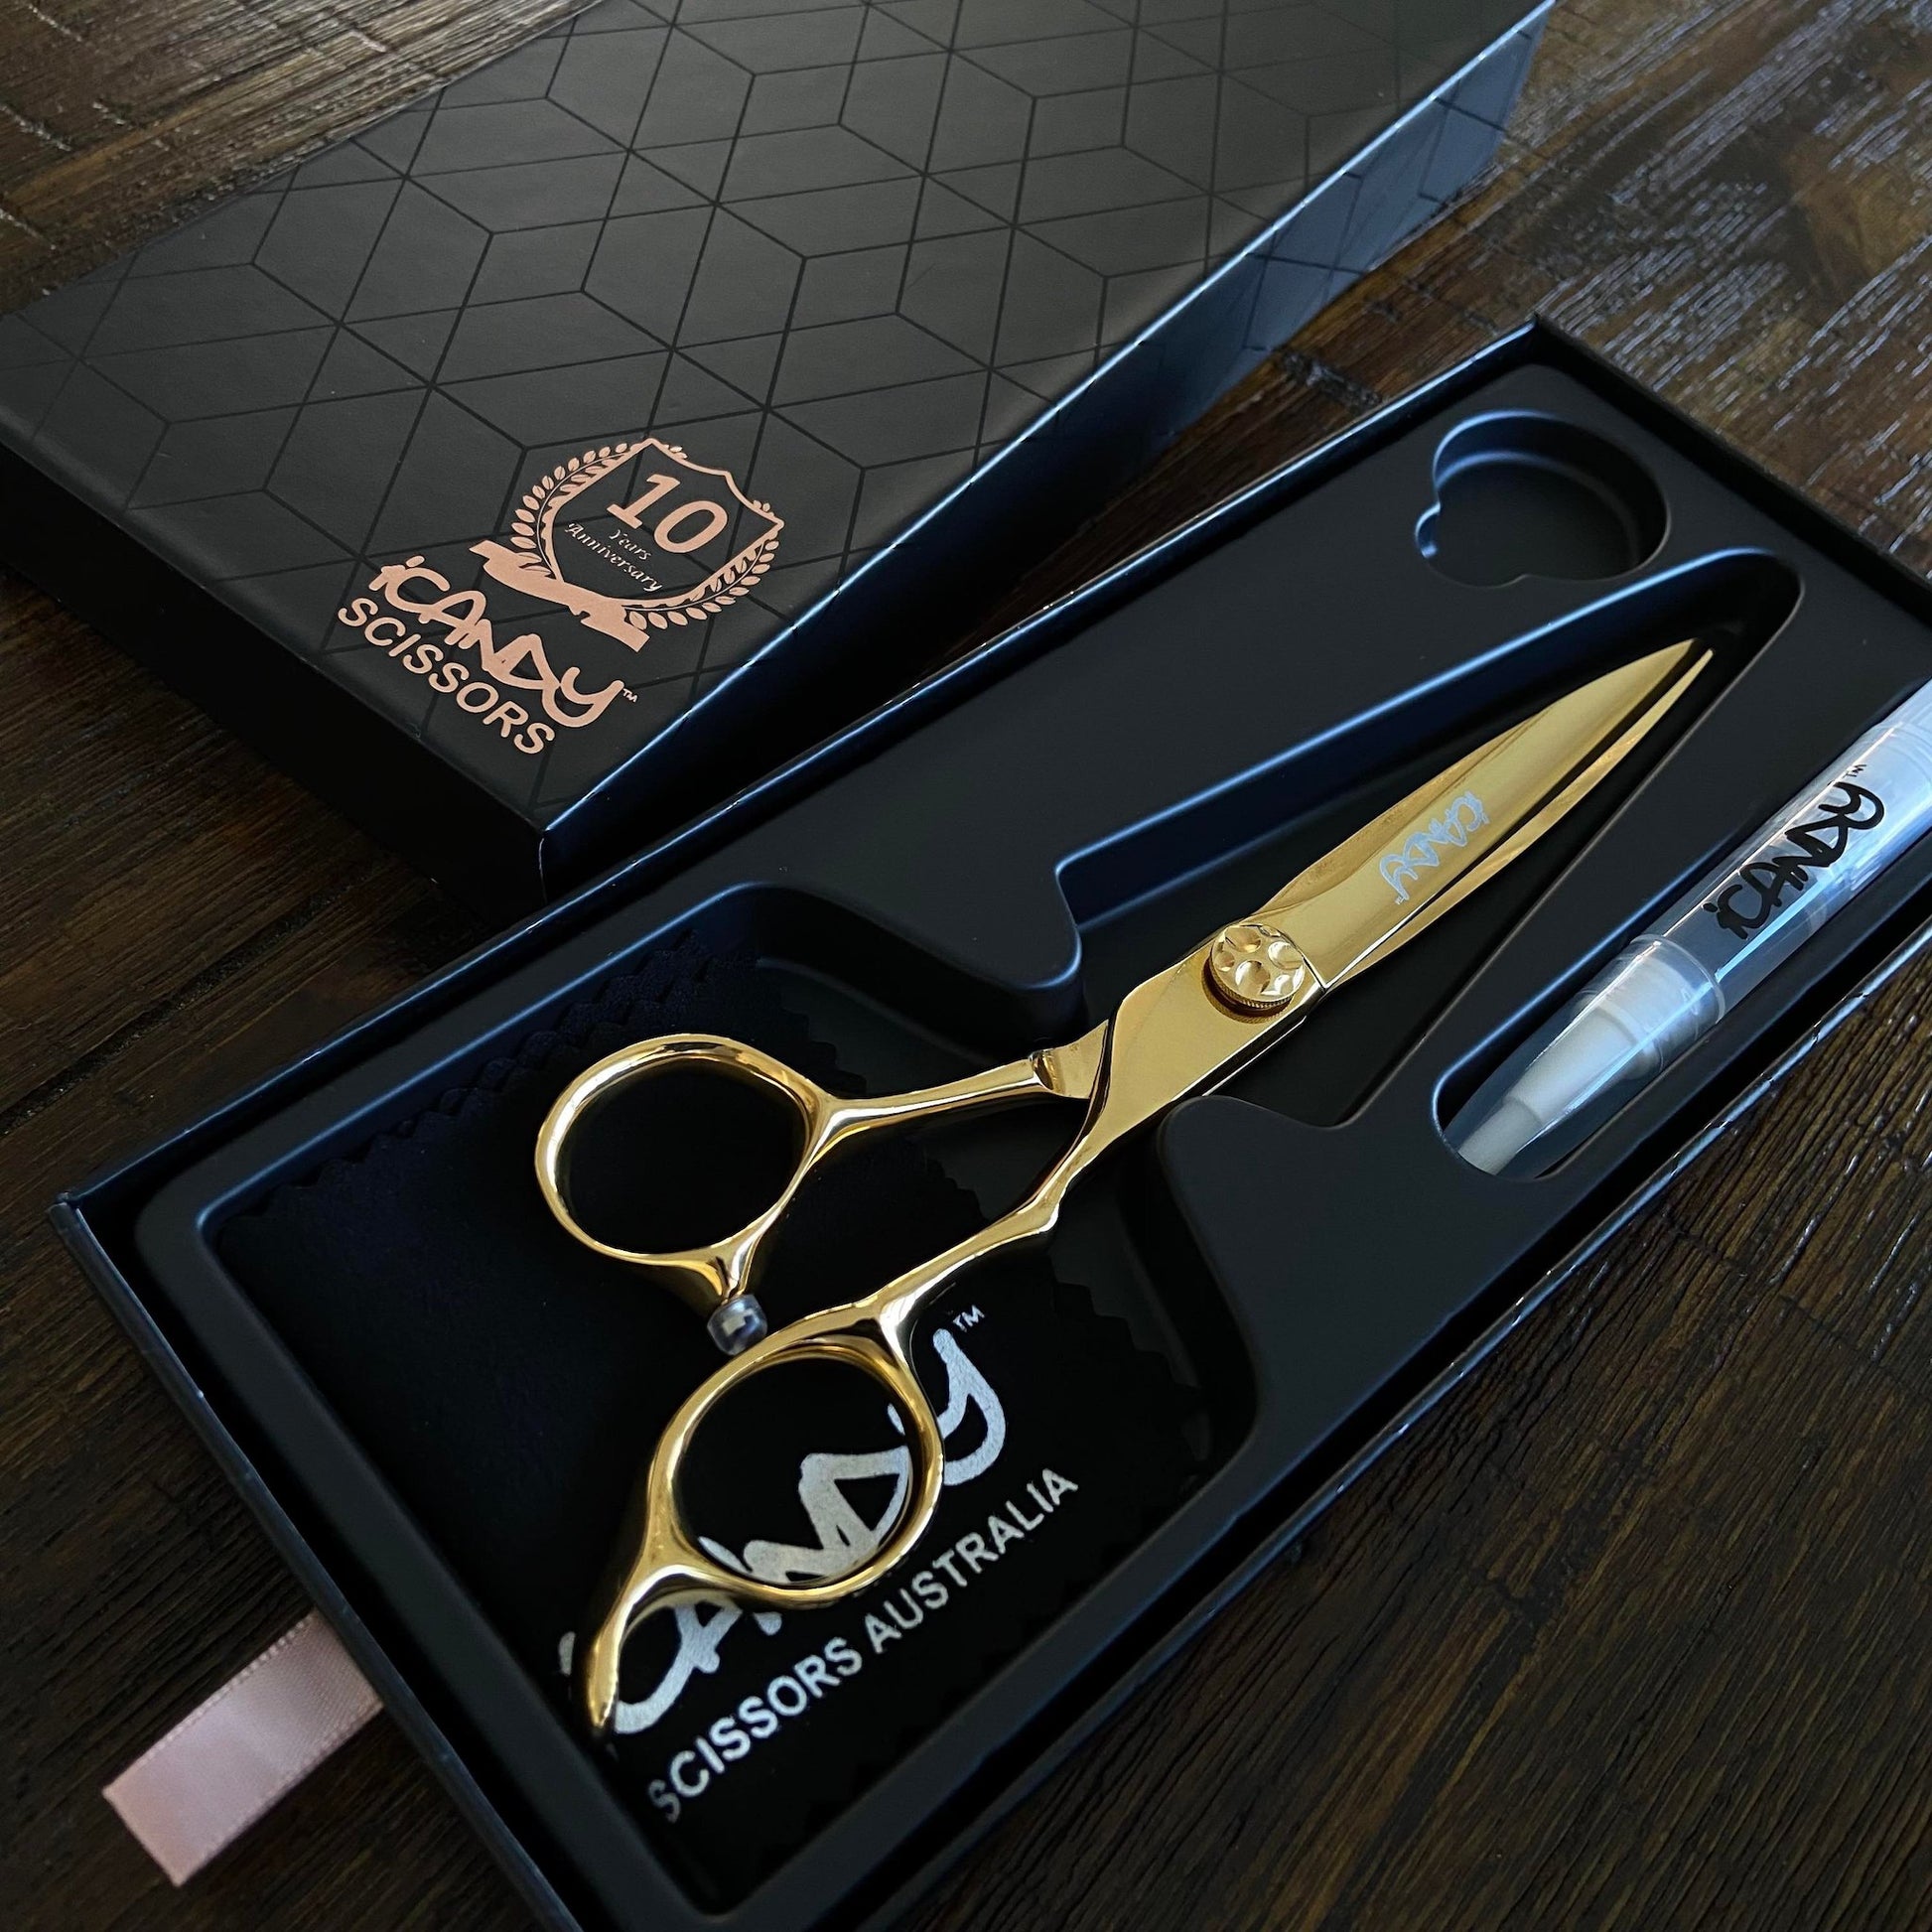 iCandy Sword Yellow Gold VG10 6.6" 10 Years Anniversary Edition Scissors Open Box 